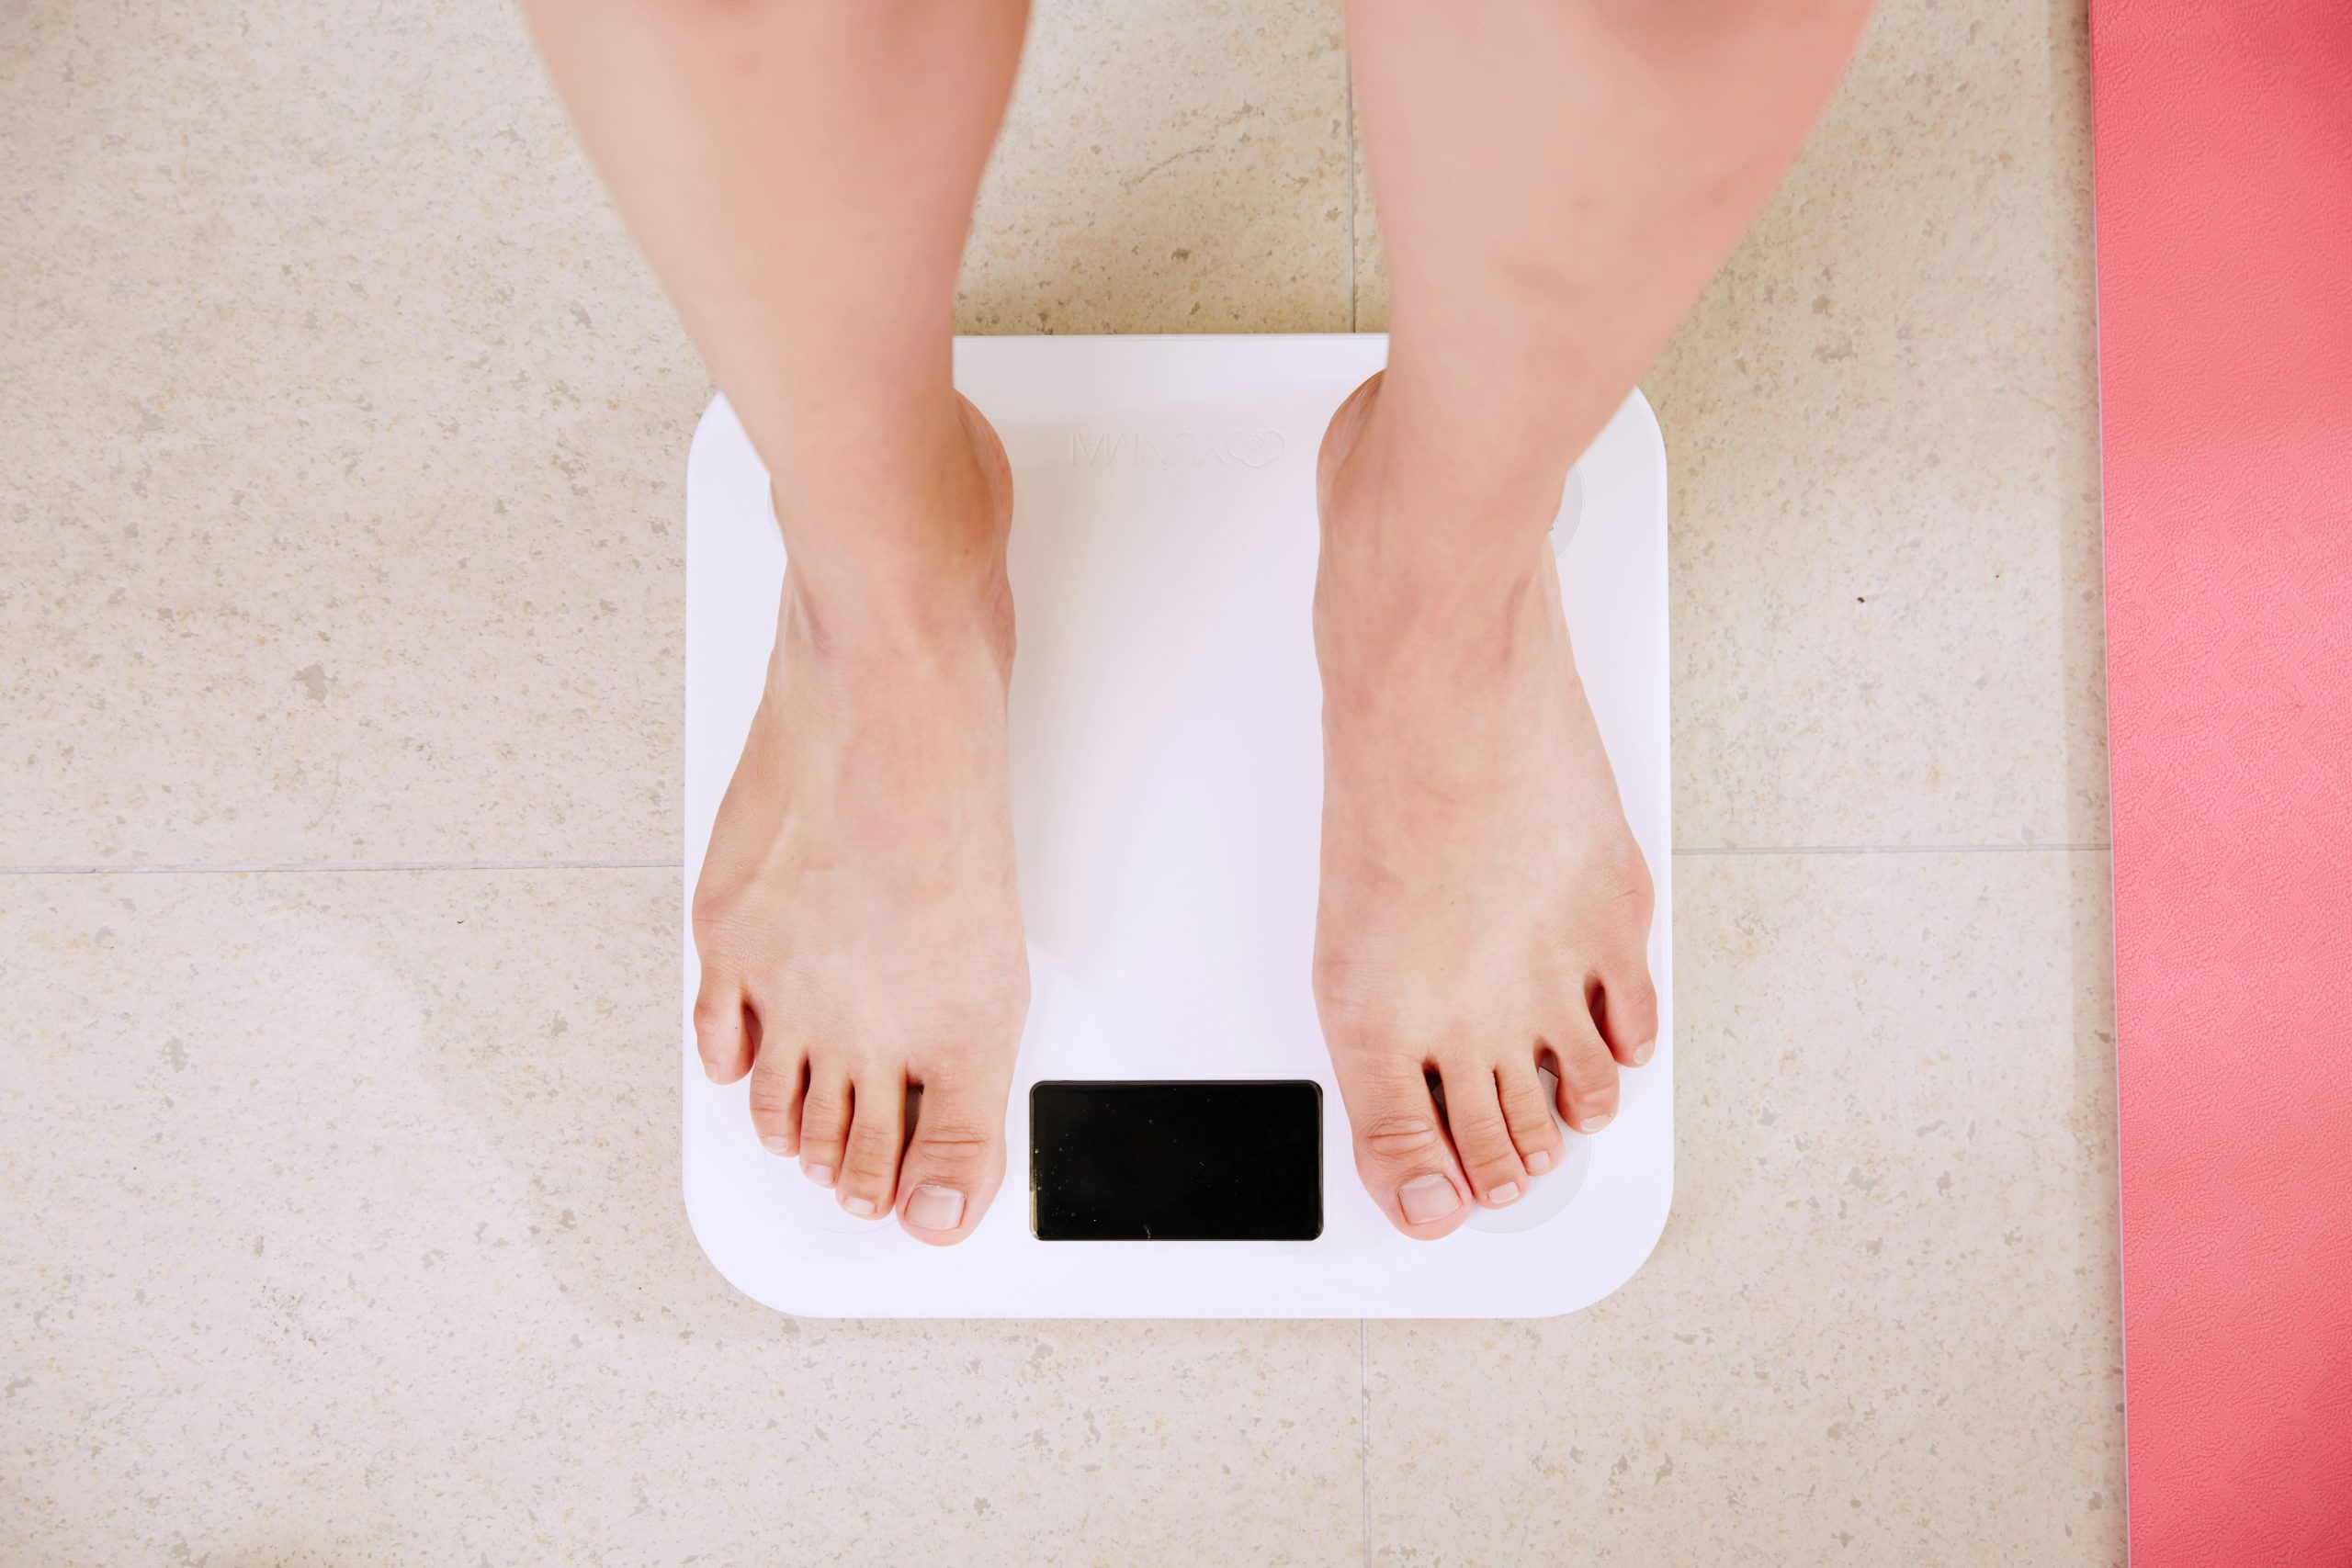 Medical Weighing Scales Measure More Than Weight